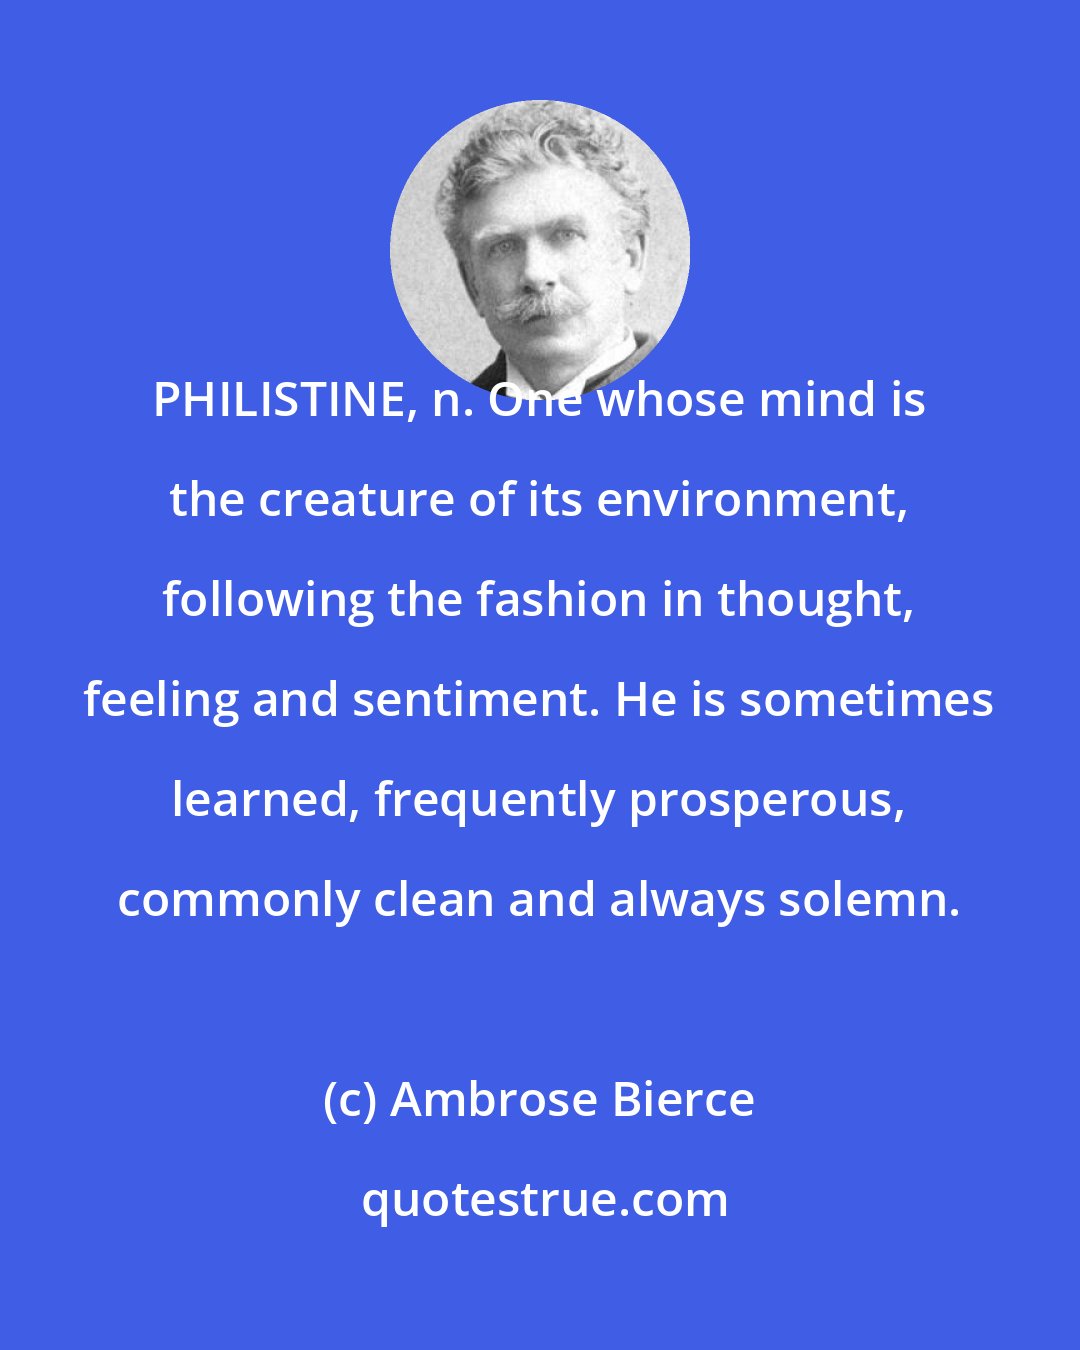 Ambrose Bierce: PHILISTINE, n. One whose mind is the creature of its environment, following the fashion in thought, feeling and sentiment. He is sometimes learned, frequently prosperous, commonly clean and always solemn.